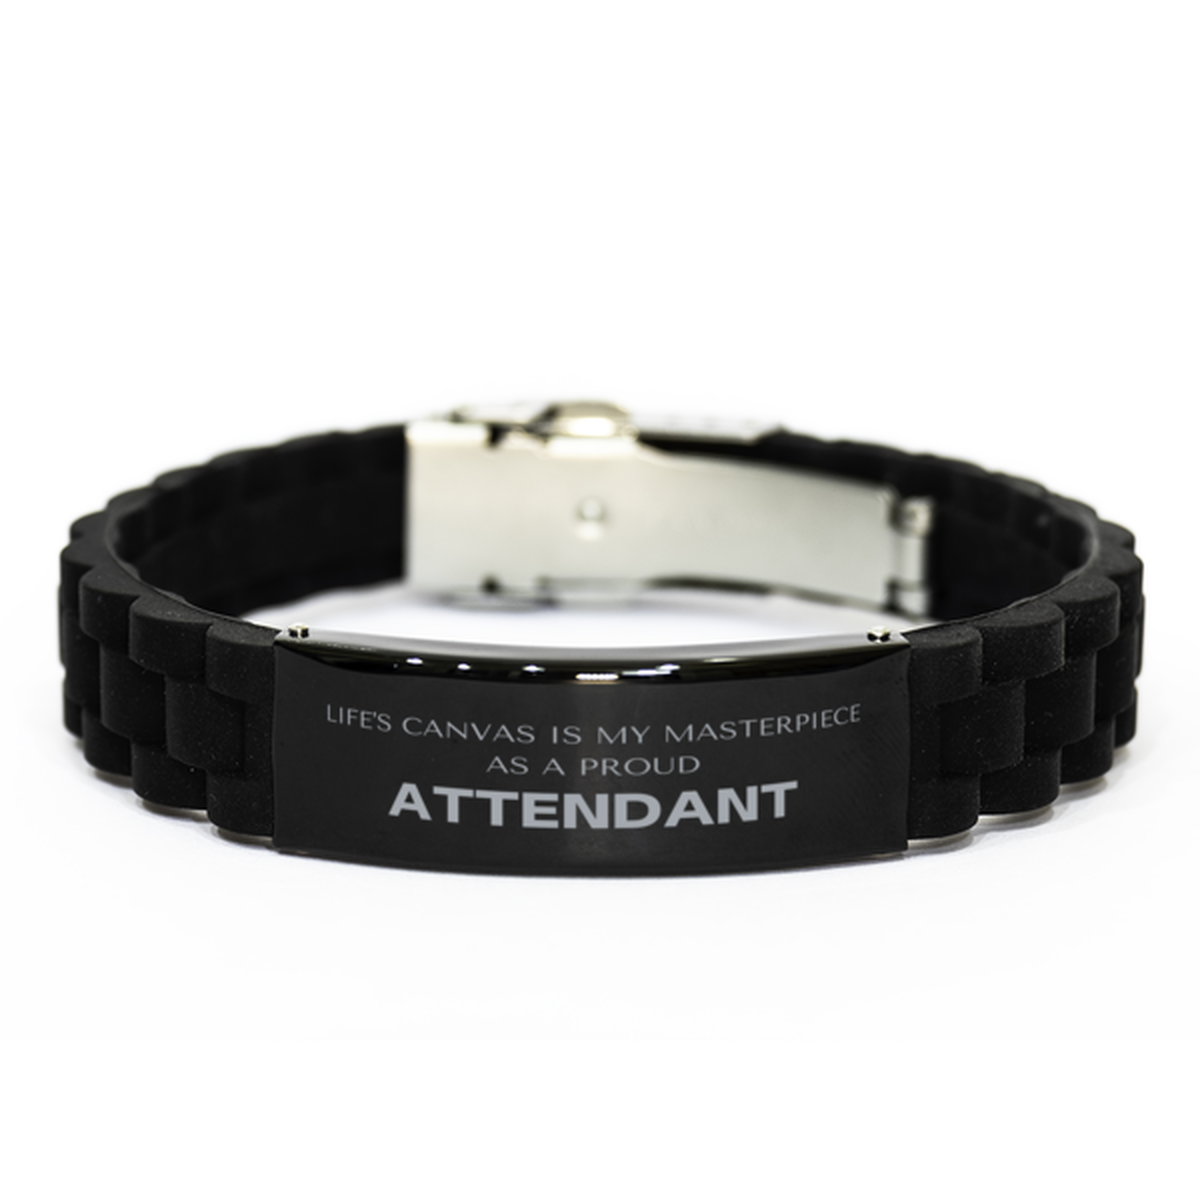 Proud Attendant Gifts, Life's canvas is my masterpiece, Epic Birthday Christmas Unique Black Glidelock Clasp Bracelet For Attendant, Coworkers, Men, Women, Friends